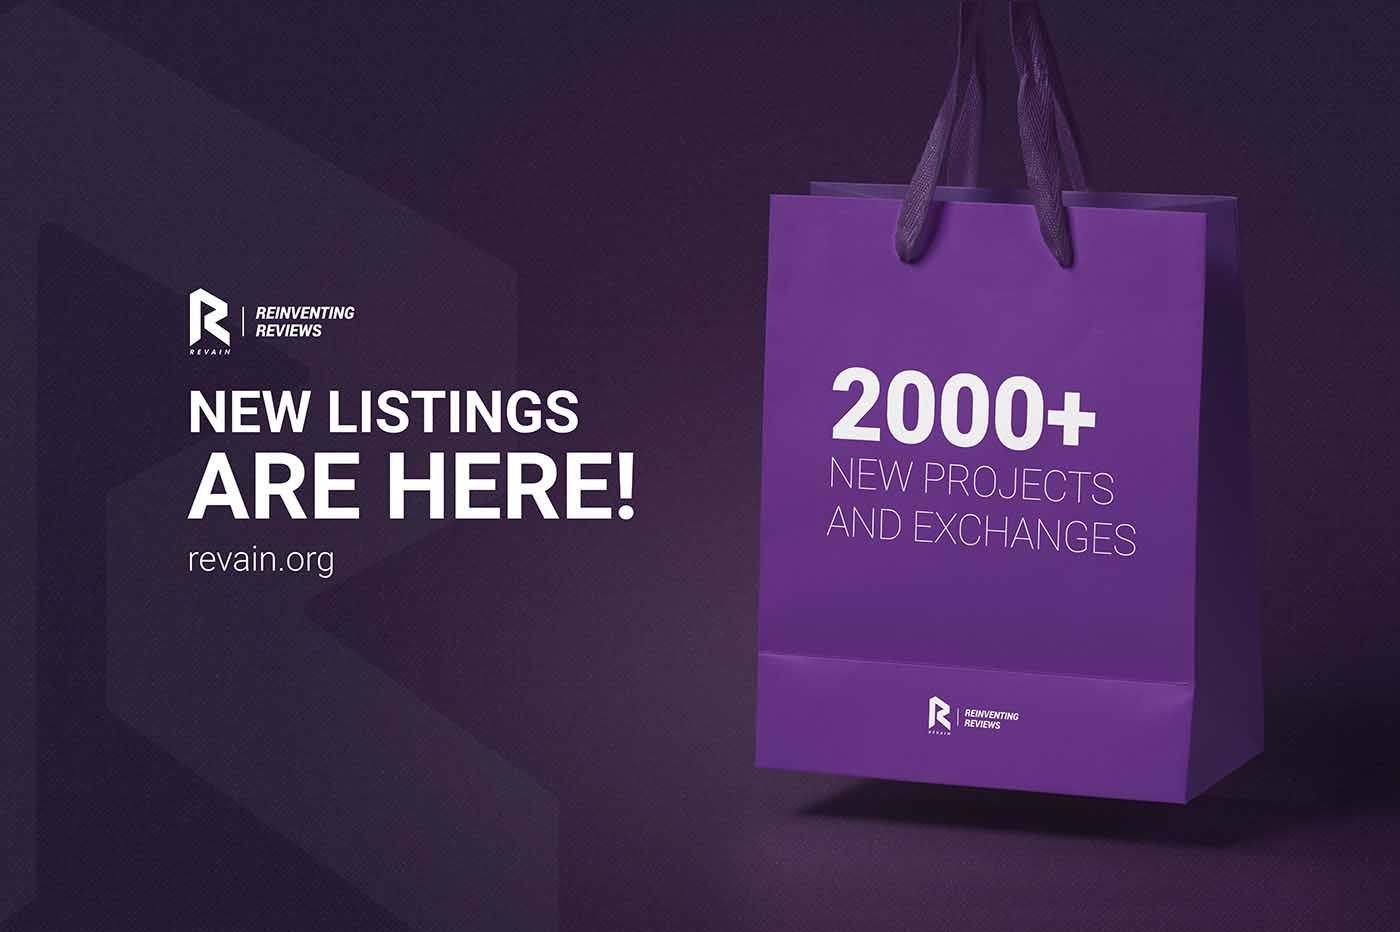 More than 2000 crypto projects and exchanges were listed on Revain